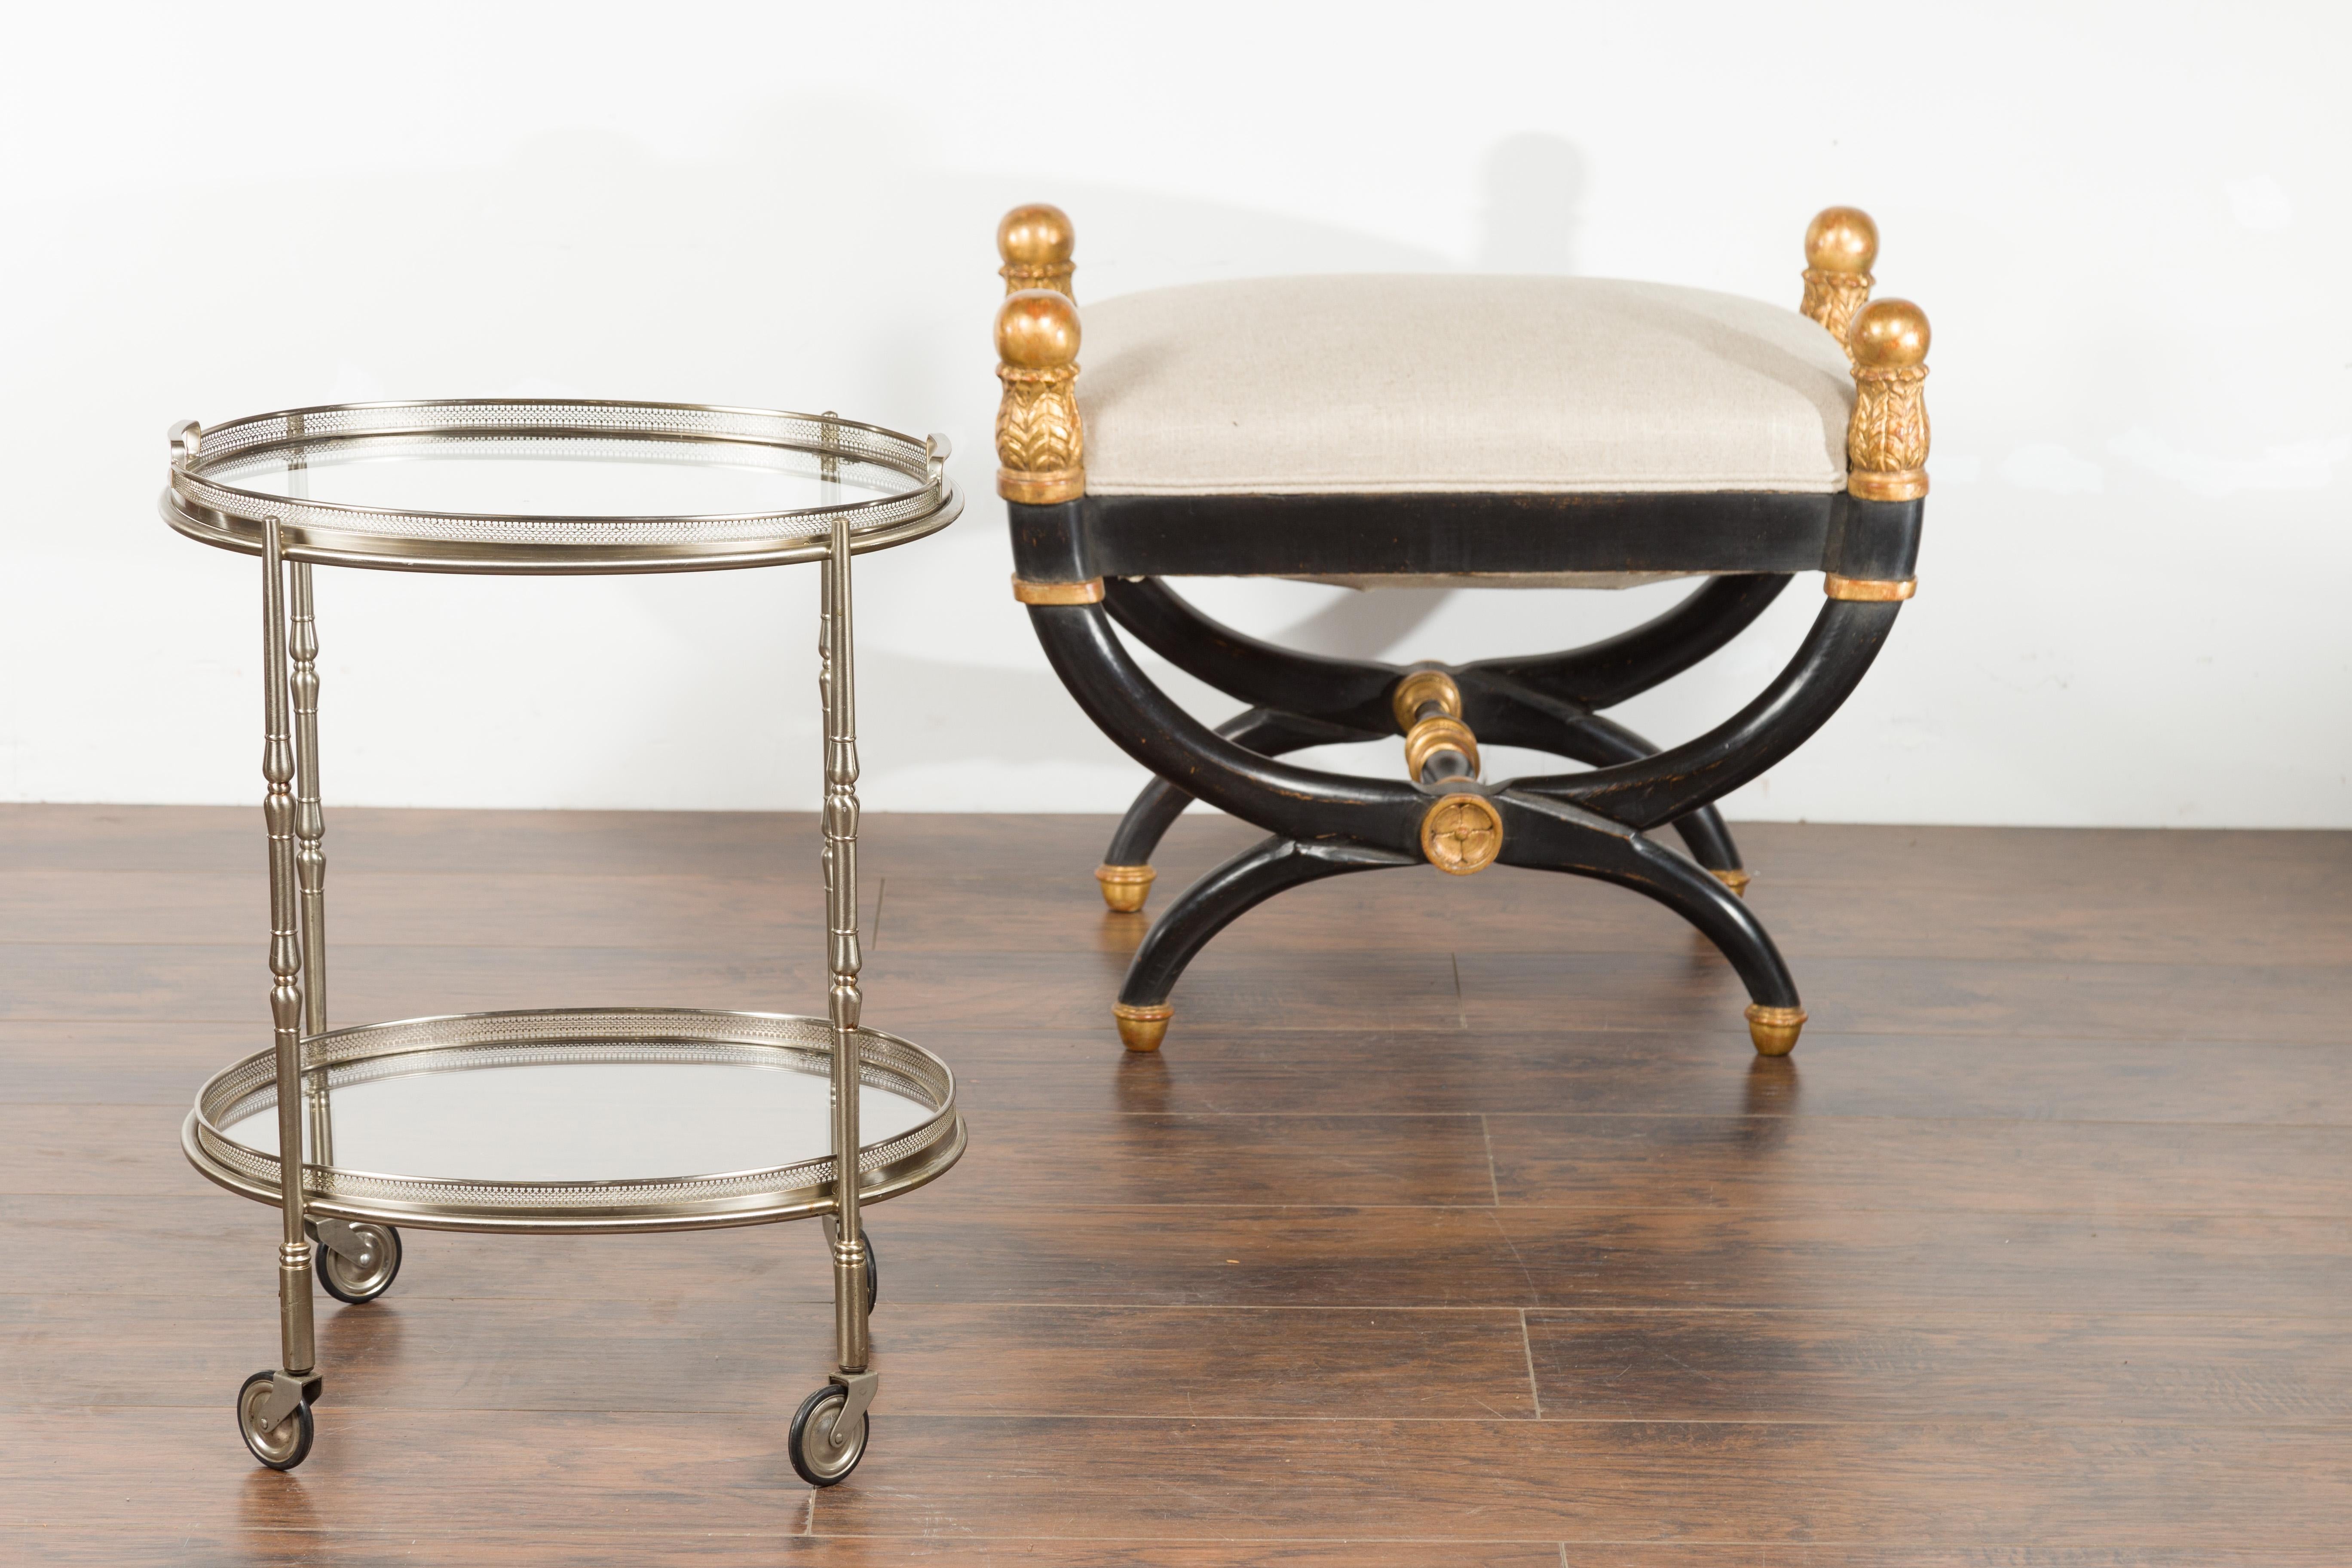 A vintage Italian oval steel trolley from the mid-20th century, with pierced gallery, mirrored shelves and casters. Created in Italy during the midcentury period, this steel trolley features an oval mirrored top surrounded by a delicately pierced